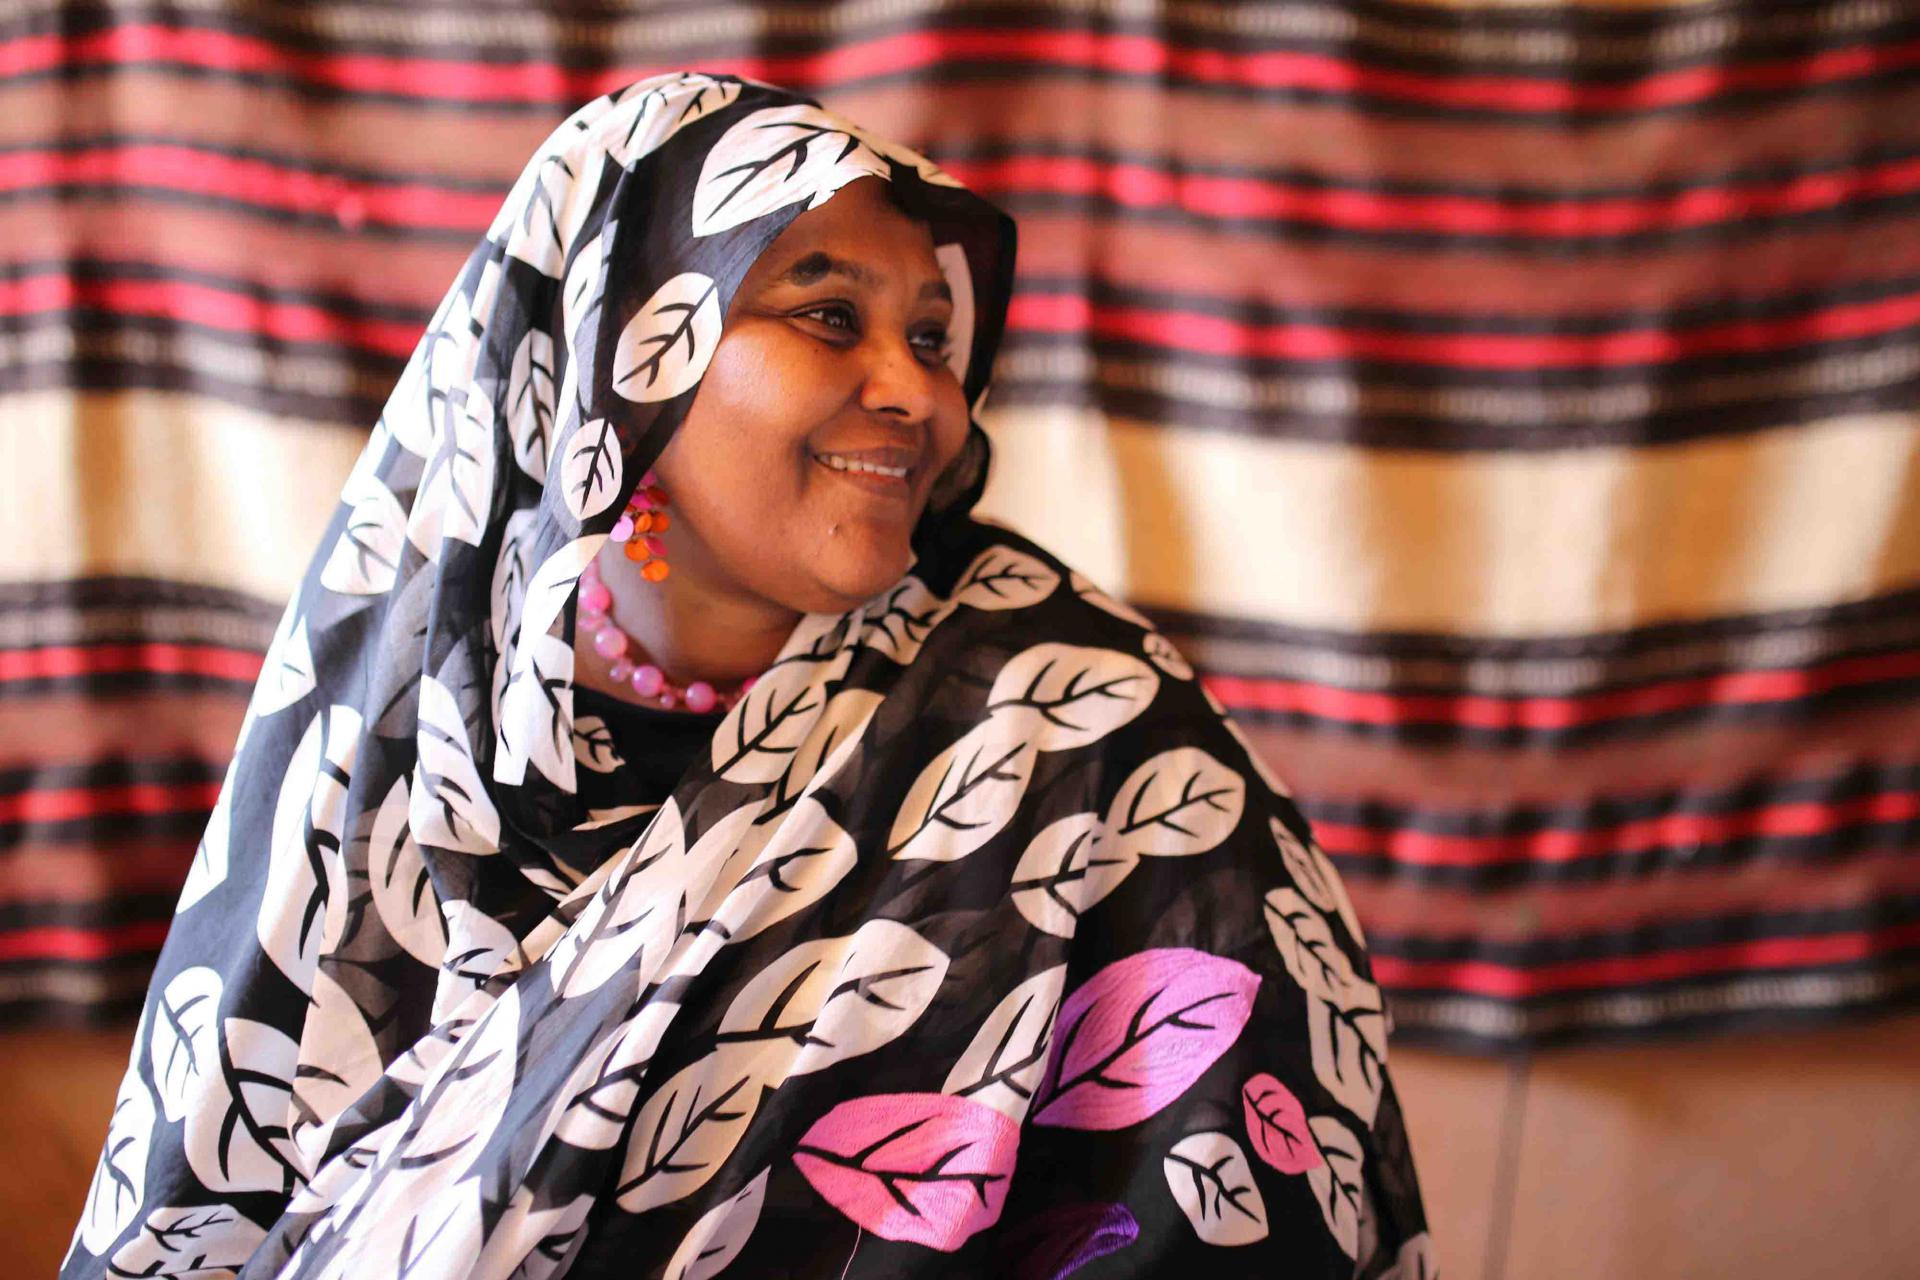 "The appeals court freed Mariam and she is now at home," her sister Rabah said.